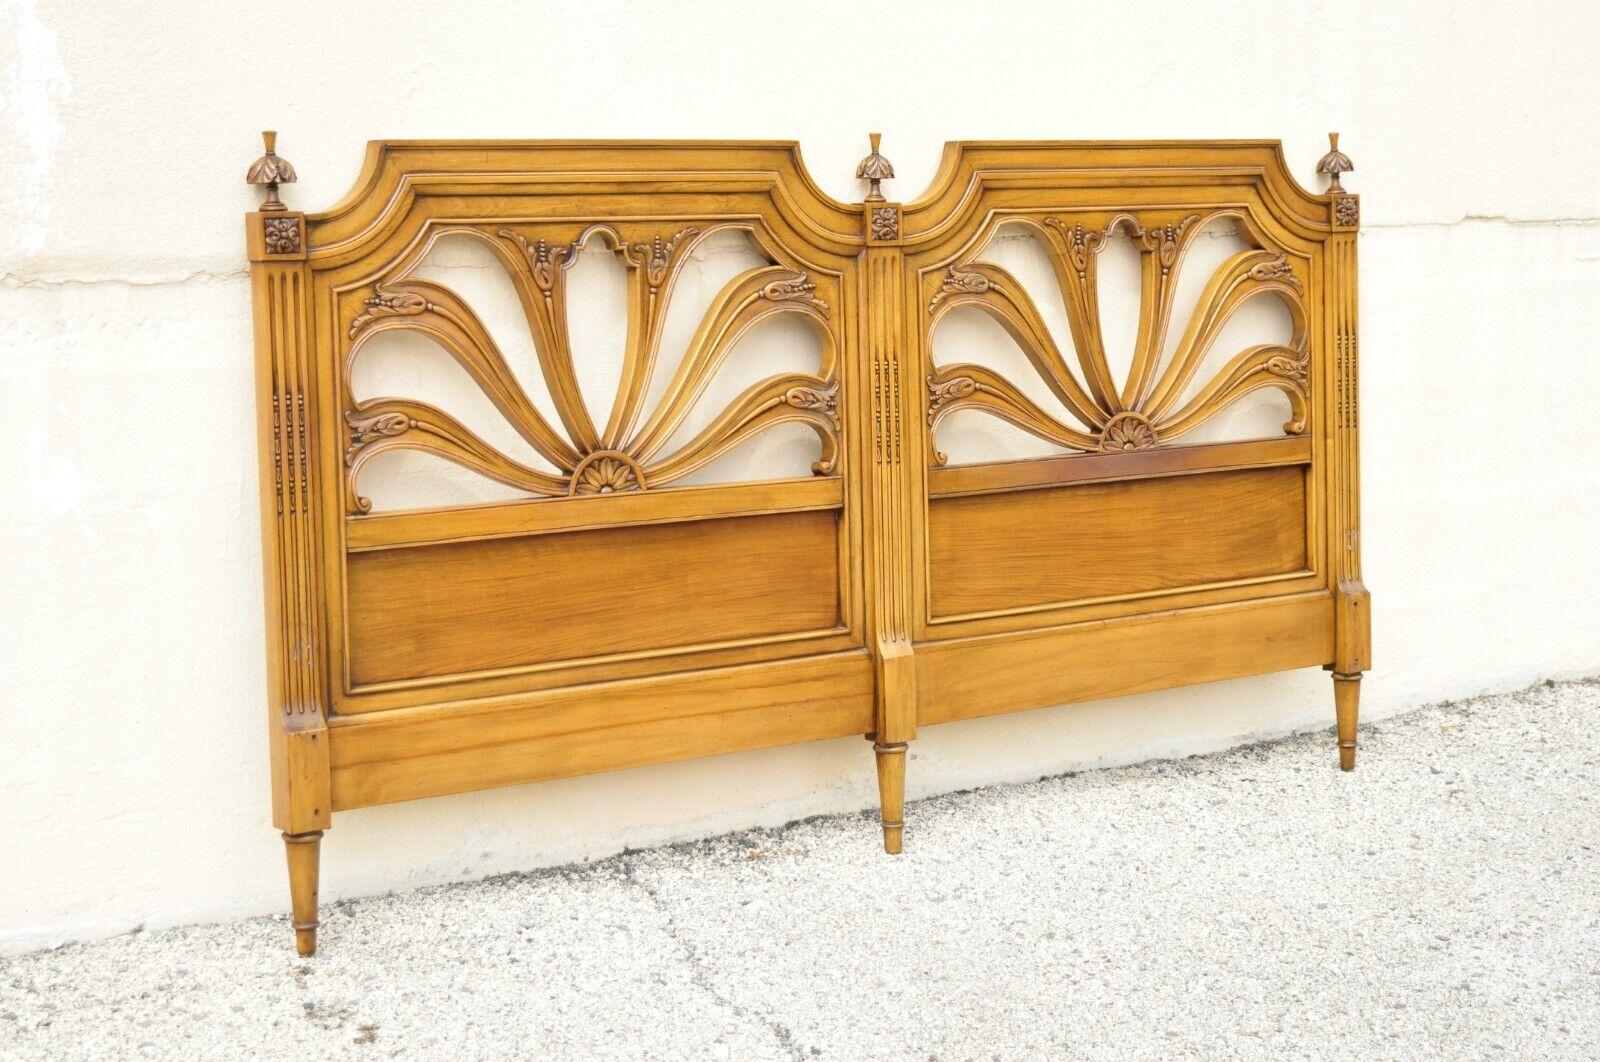 Karges Vintage French Regency Hollywood Regency walnut king size bed headboard. Item features carved wooden finials, fan carved details, tapered legs, very nice vintage item, quality American craftsmanship, great style and form. Circa mid-20th